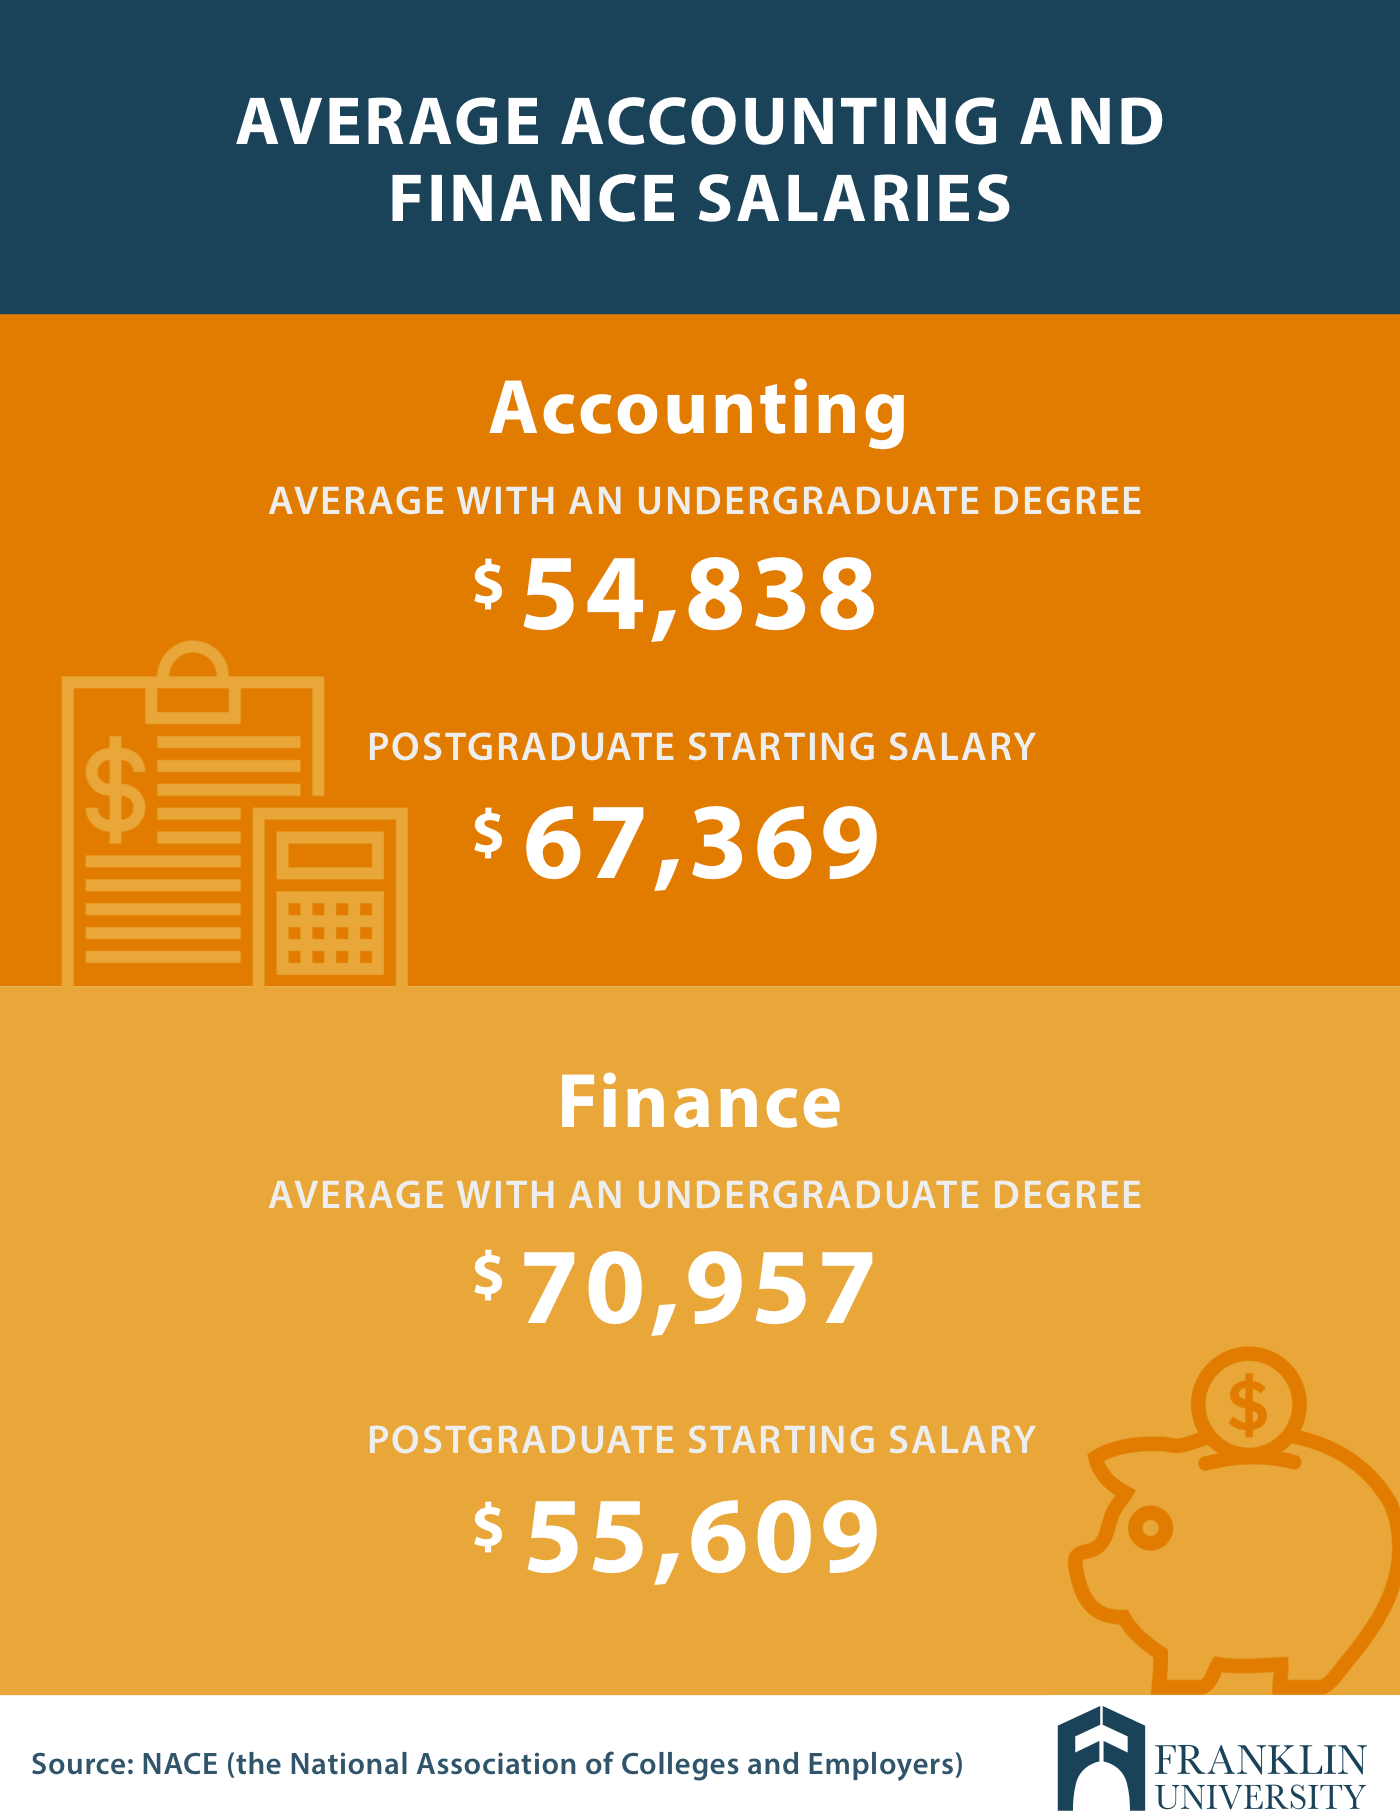 graphic describes the average accounting and finance salaries